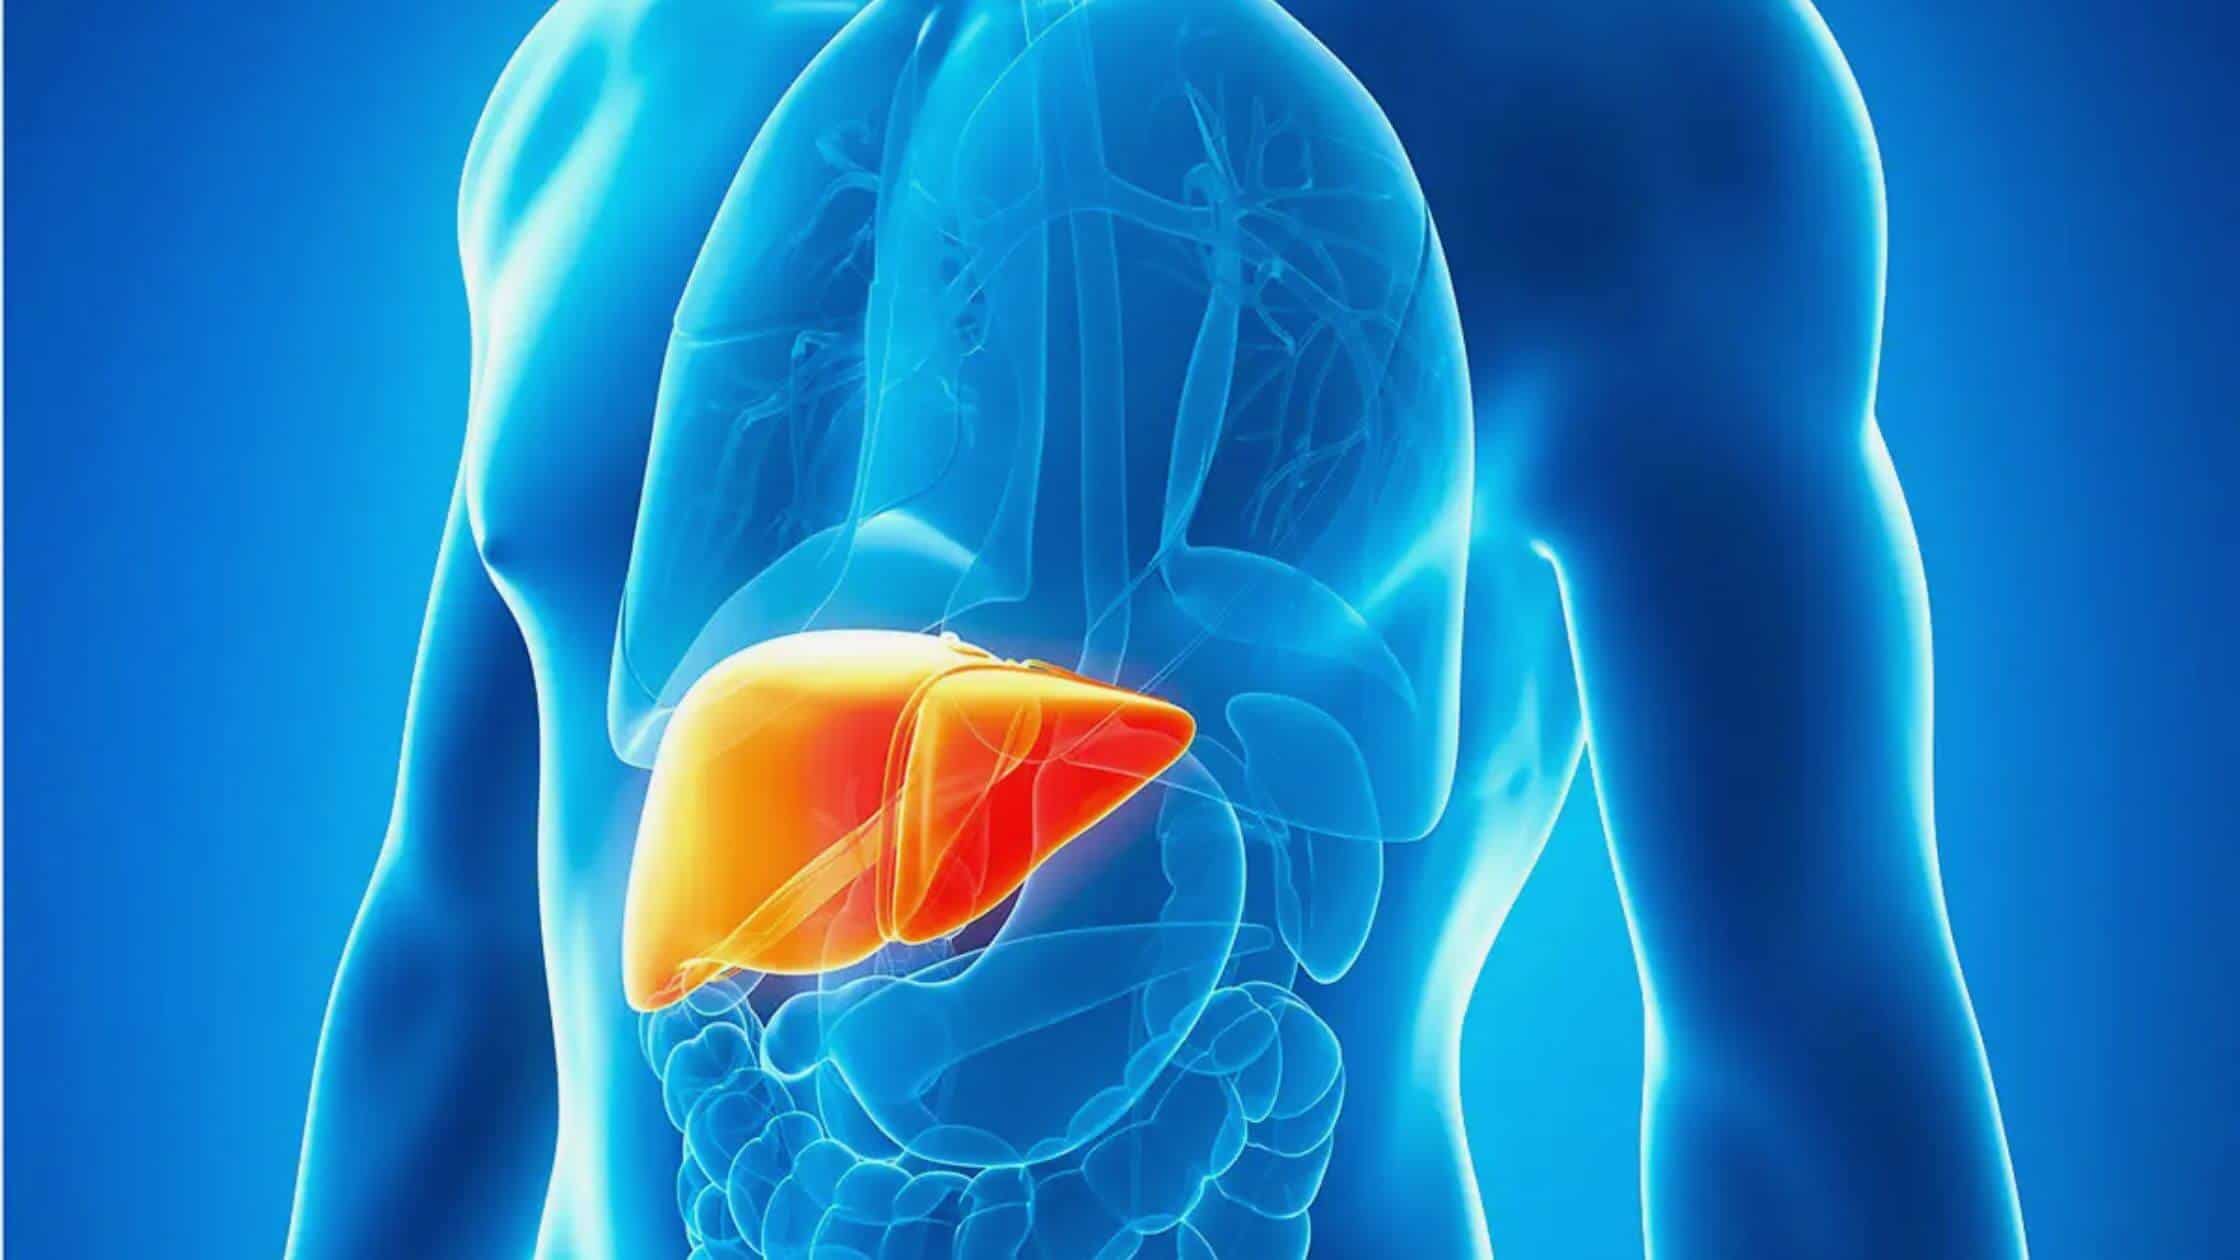 A Vital Component Of Liver Health In Old Age!